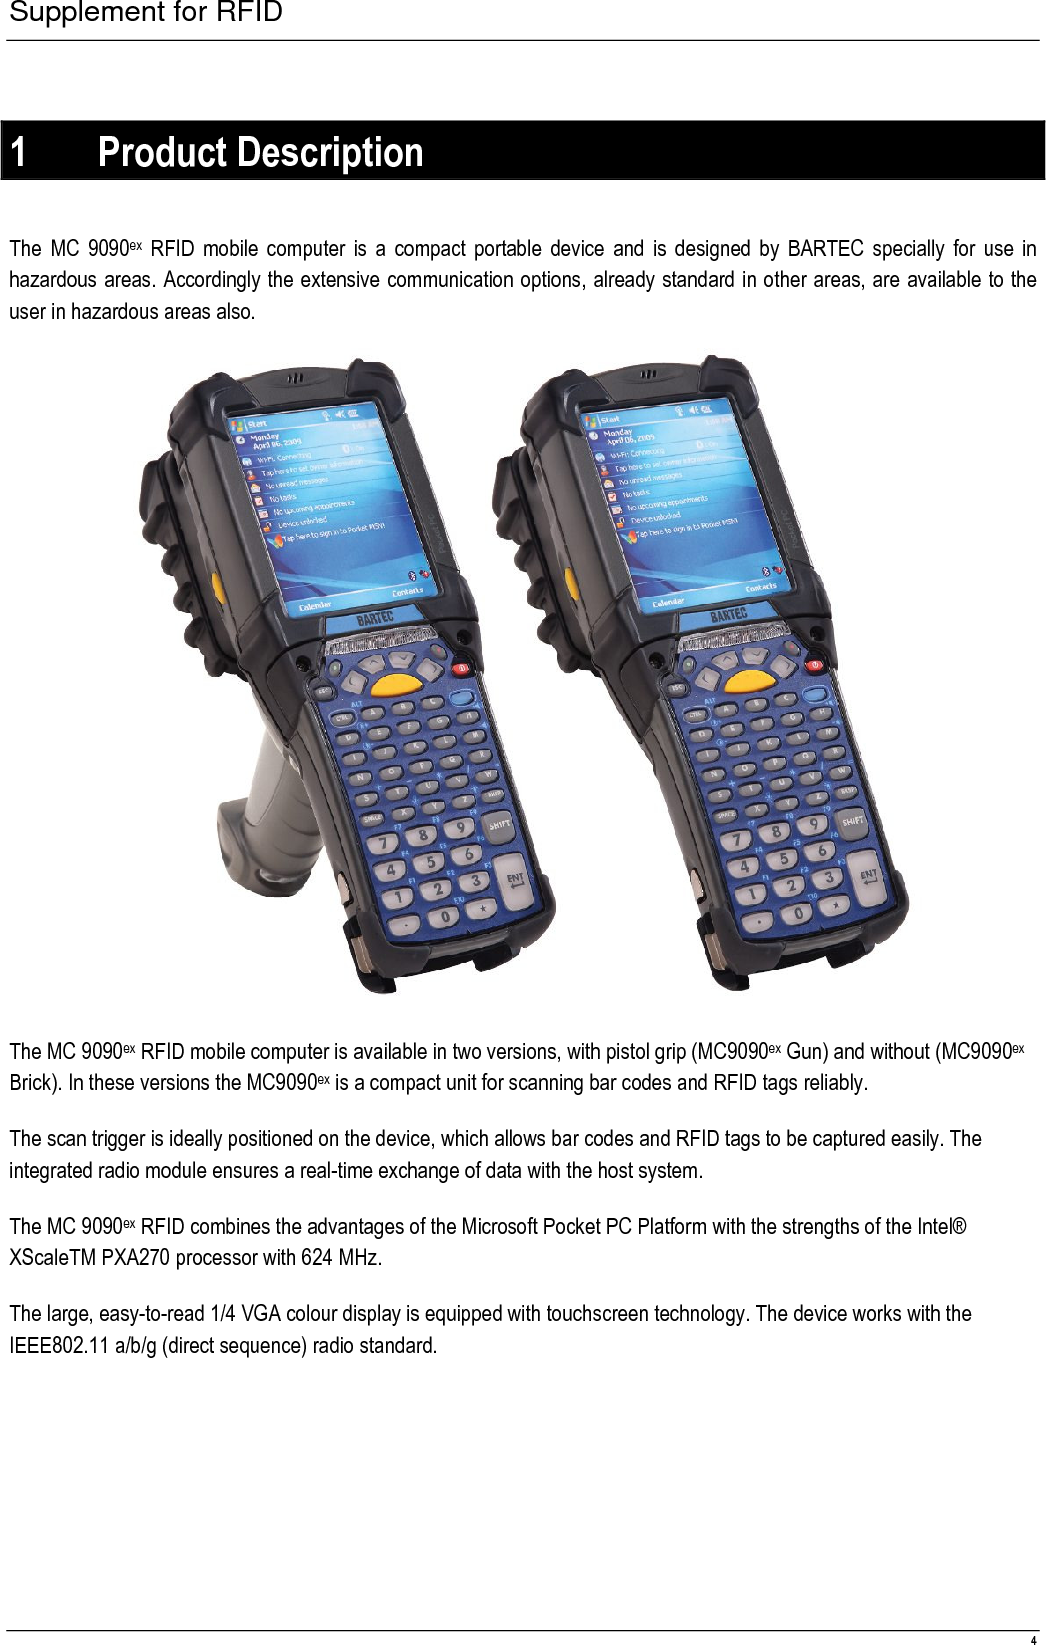 Supplement for RFID  4  1 Product Description  The MC 9090ex  RFID mobile computer is a  compact portable device and  is designed by  BARTEC specially  for use  in hazardous areas. Accordingly the extensive communication options, already standard in other areas, are available to the user in hazardous areas also.   The MC 9090ex RFID mobile computer is available in two versions, with pistol grip (MC9090ex Gun) and without (MC9090ex Brick). In these versions the MC9090ex is a compact unit for scanning bar codes and RFID tags reliably. The scan trigger is ideally positioned on the device, which allows bar codes and RFID tags to be captured easily. The integrated radio module ensures a real-time exchange of data with the host system. The MC 9090ex RFID combines the advantages of the Microsoft Pocket PC Platform with the strengths of the Intel® XScaleTM PXA270 processor with 624 MHz. The large, easy-to-read 1/4 VGA colour display is equipped with touchscreen technology. The device works with the IEEE802.11 a/b/g (direct sequence) radio standard. 